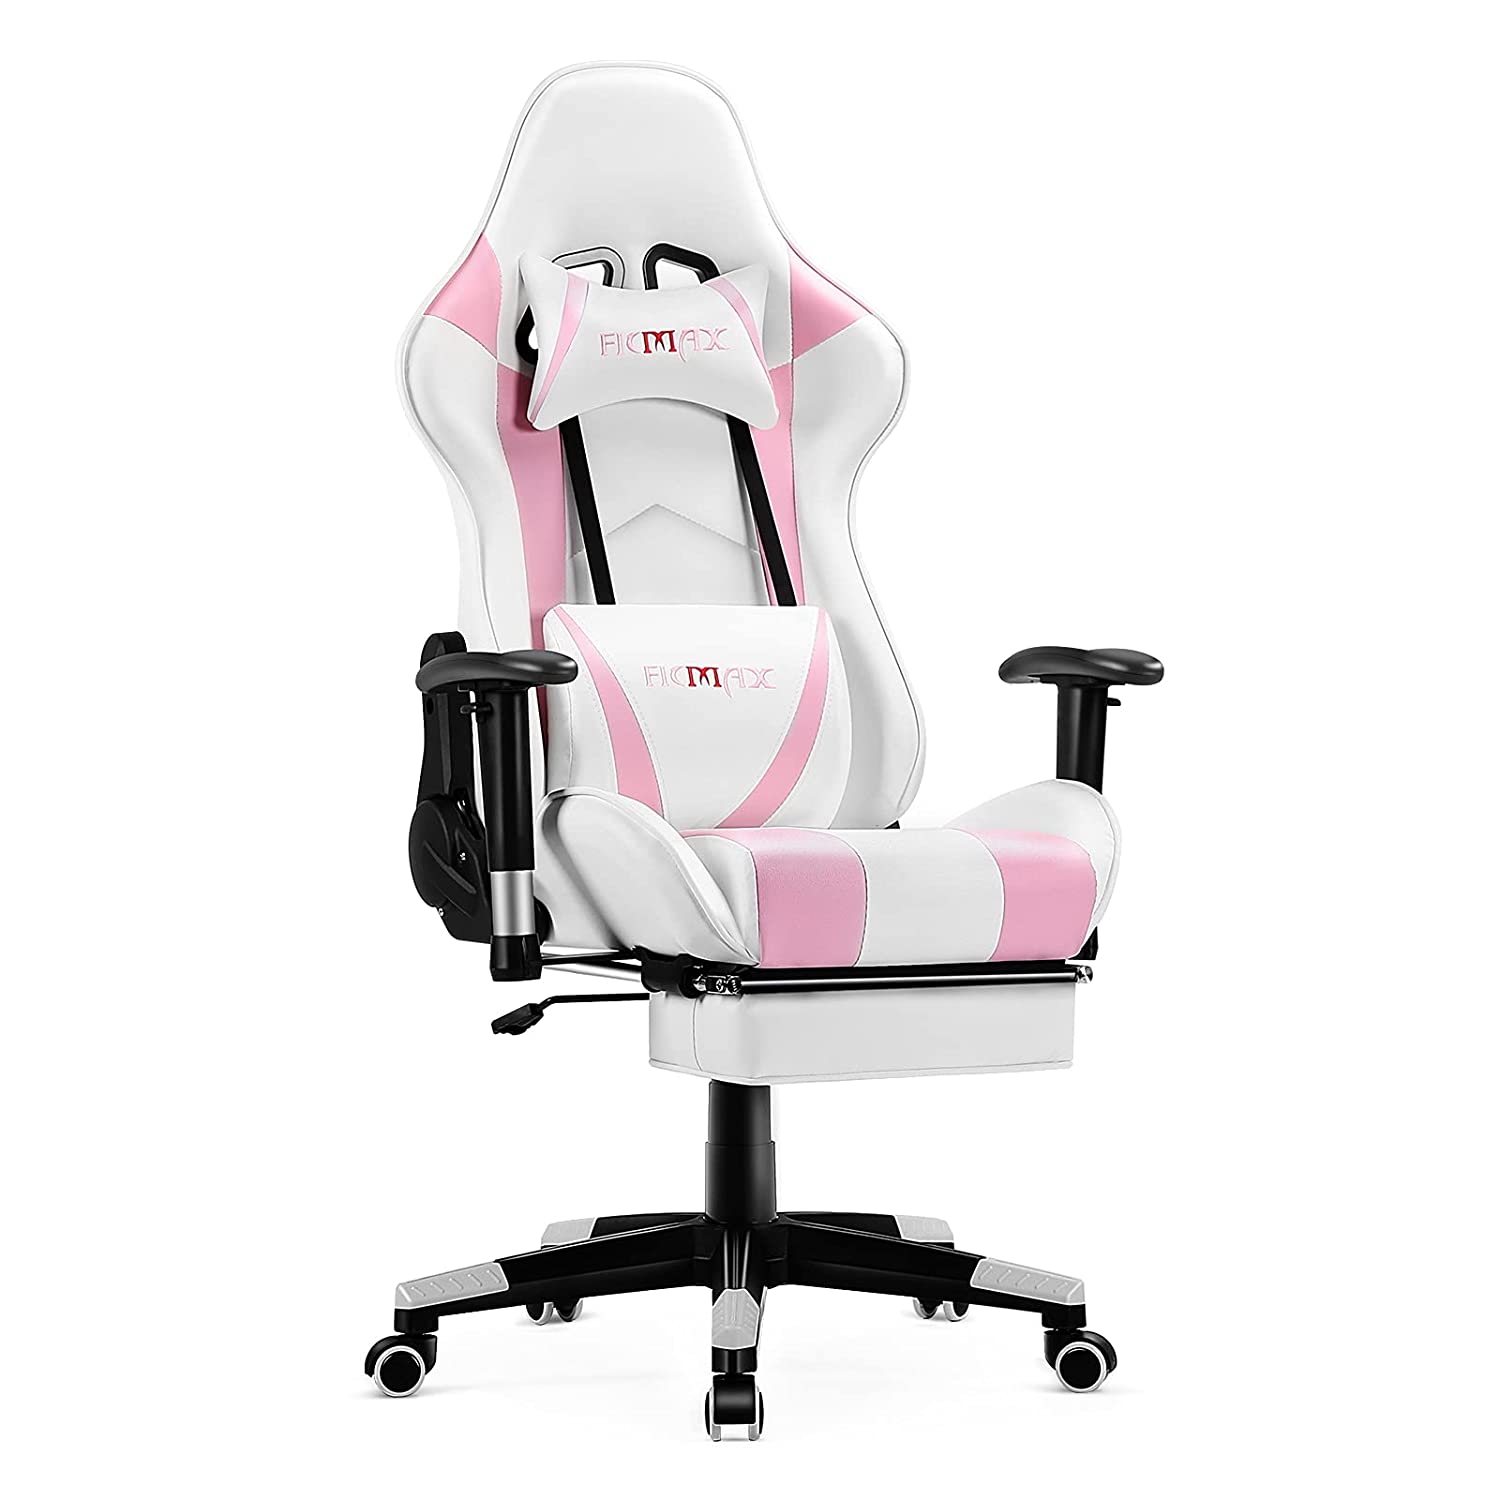 The Best Pink Gaming Chairs to Fit Your Comfort - The Germinate